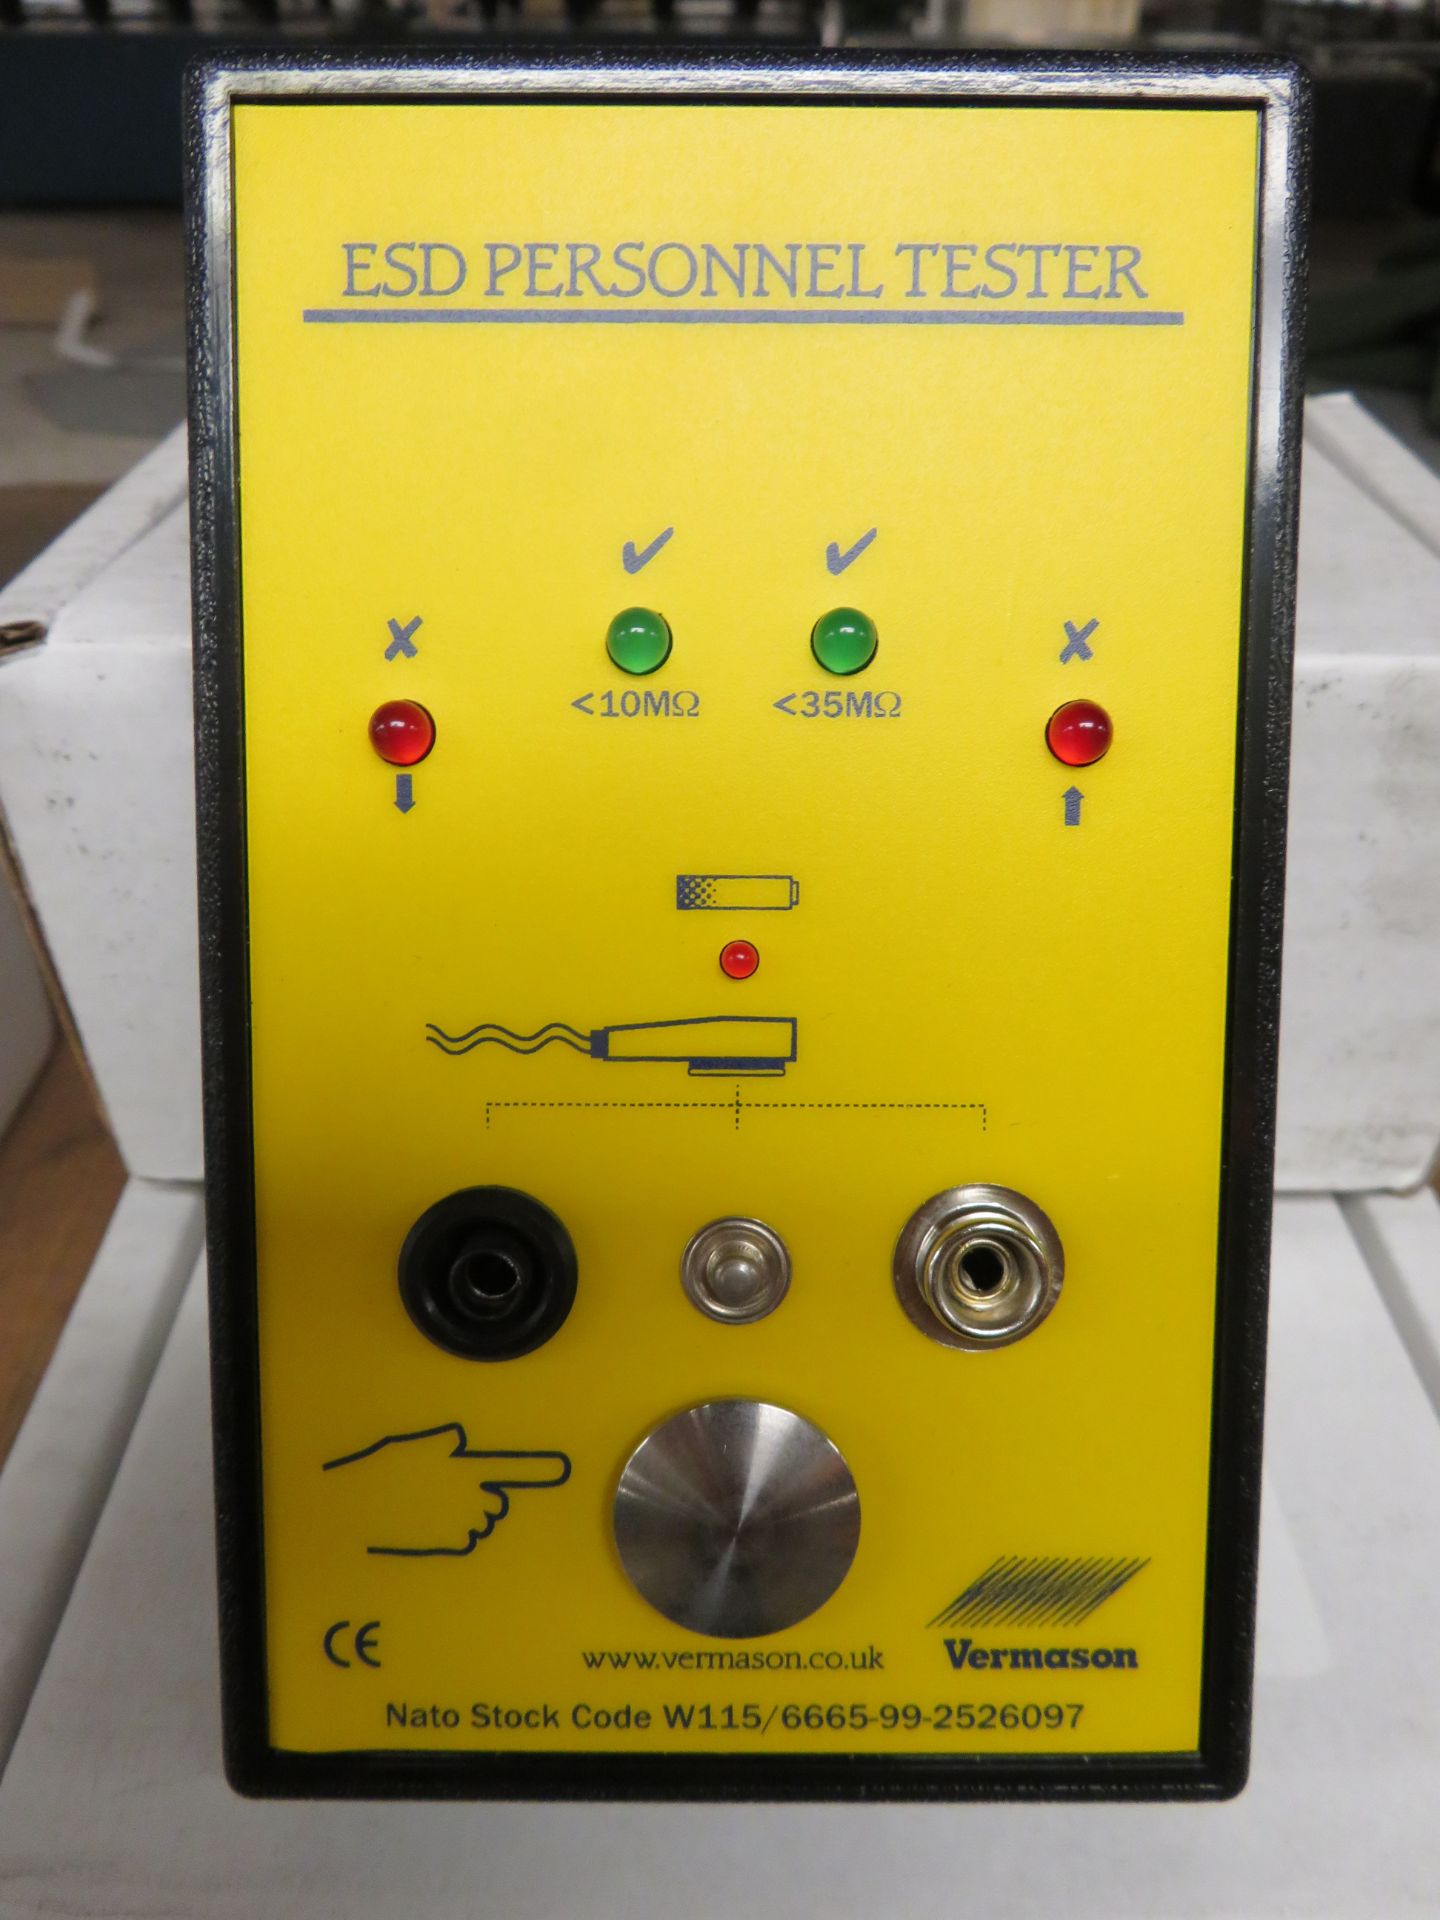 3x Vermason ESD Personnel Tester. - Image 2 of 2